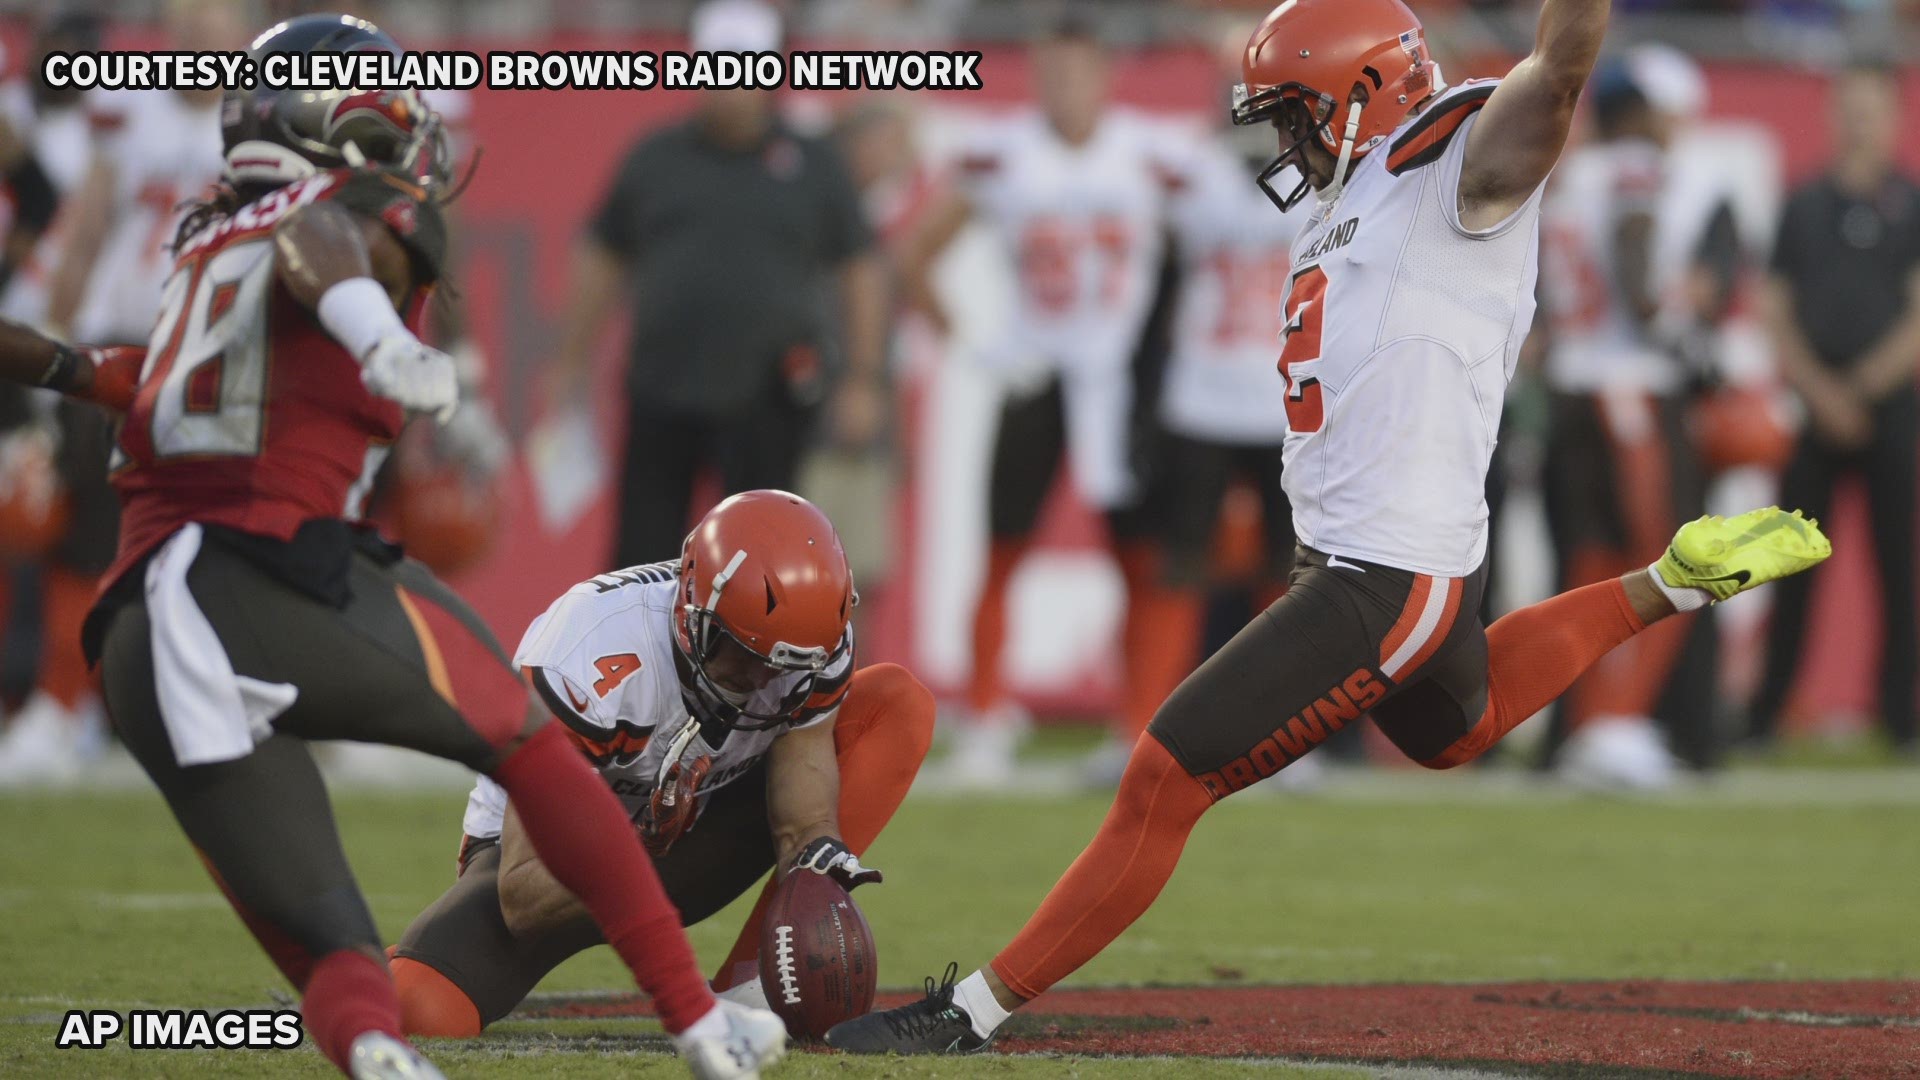 Seibert kicked four field goals in all as the Browns fell to the Bucs, 13-12 in the third exhibition game of the 2019 preseason.